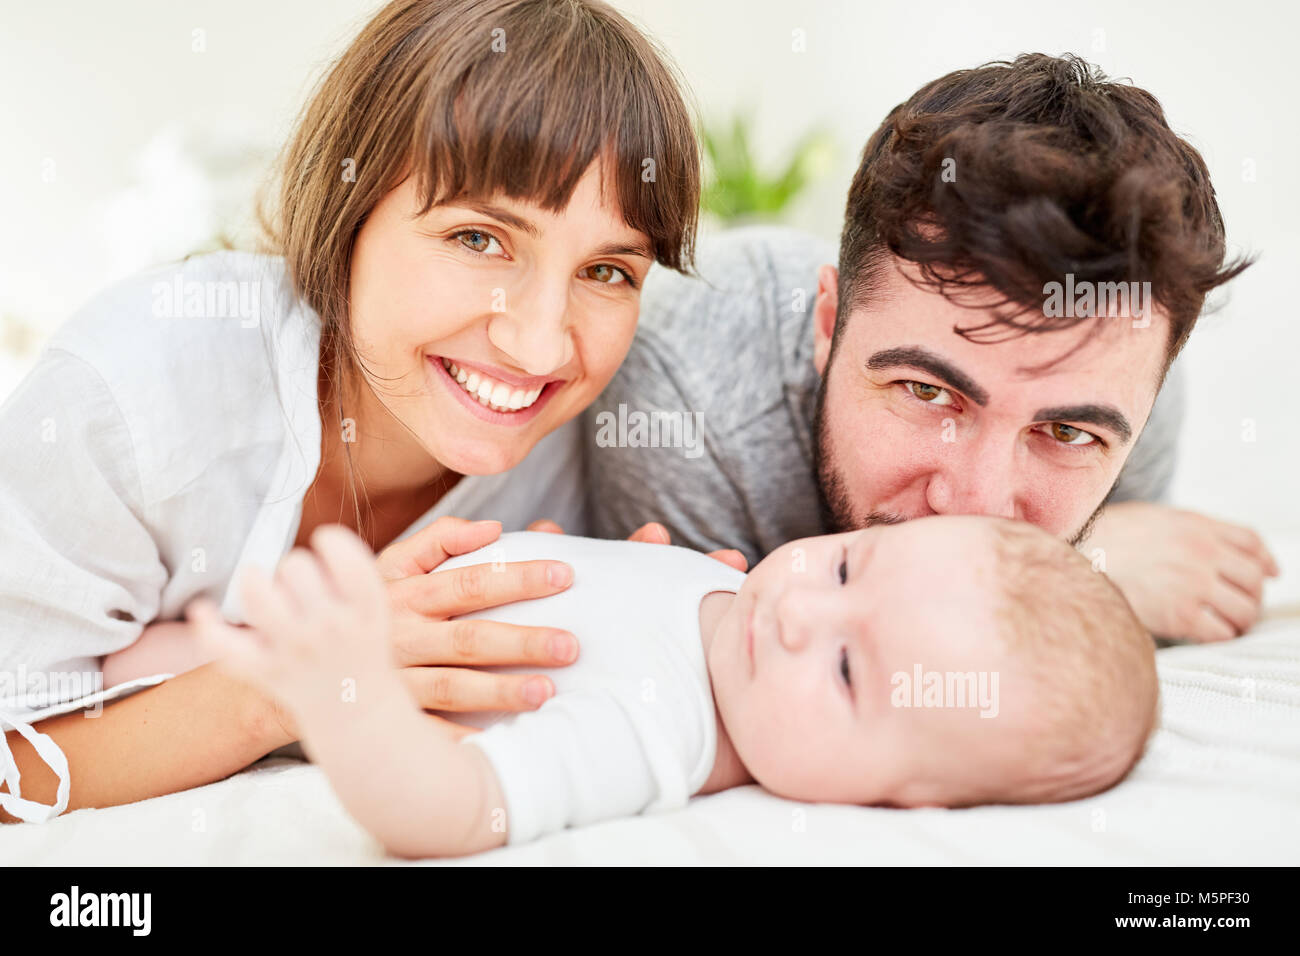 Family as happy parents together with their newborn baby Stock Photo